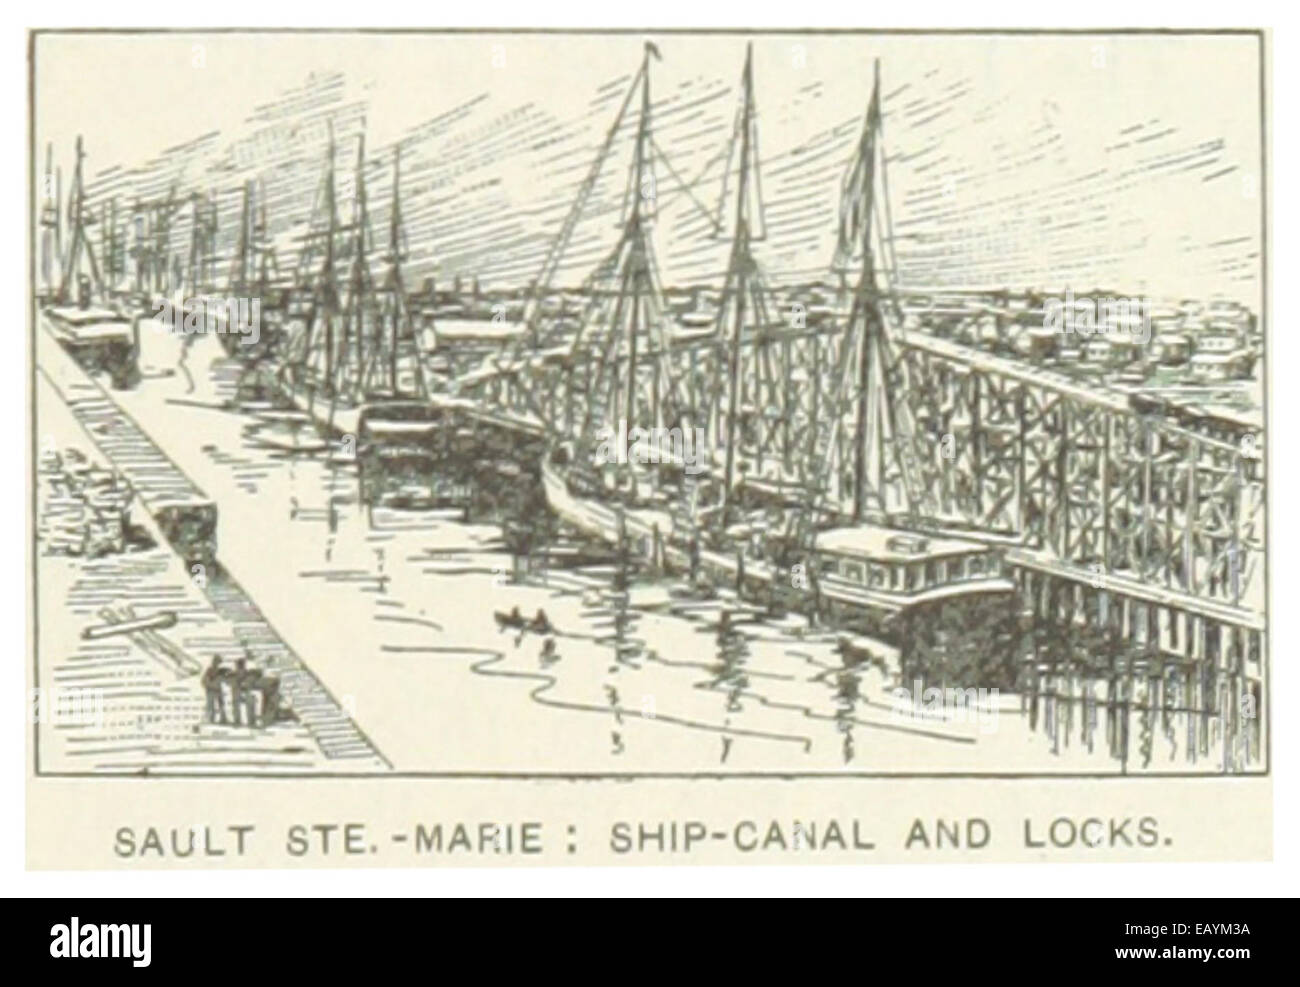 US-MI(1891) p411 SAULT STE.-MARIE, SHIP CANAL AND LOCKS Stock Photo